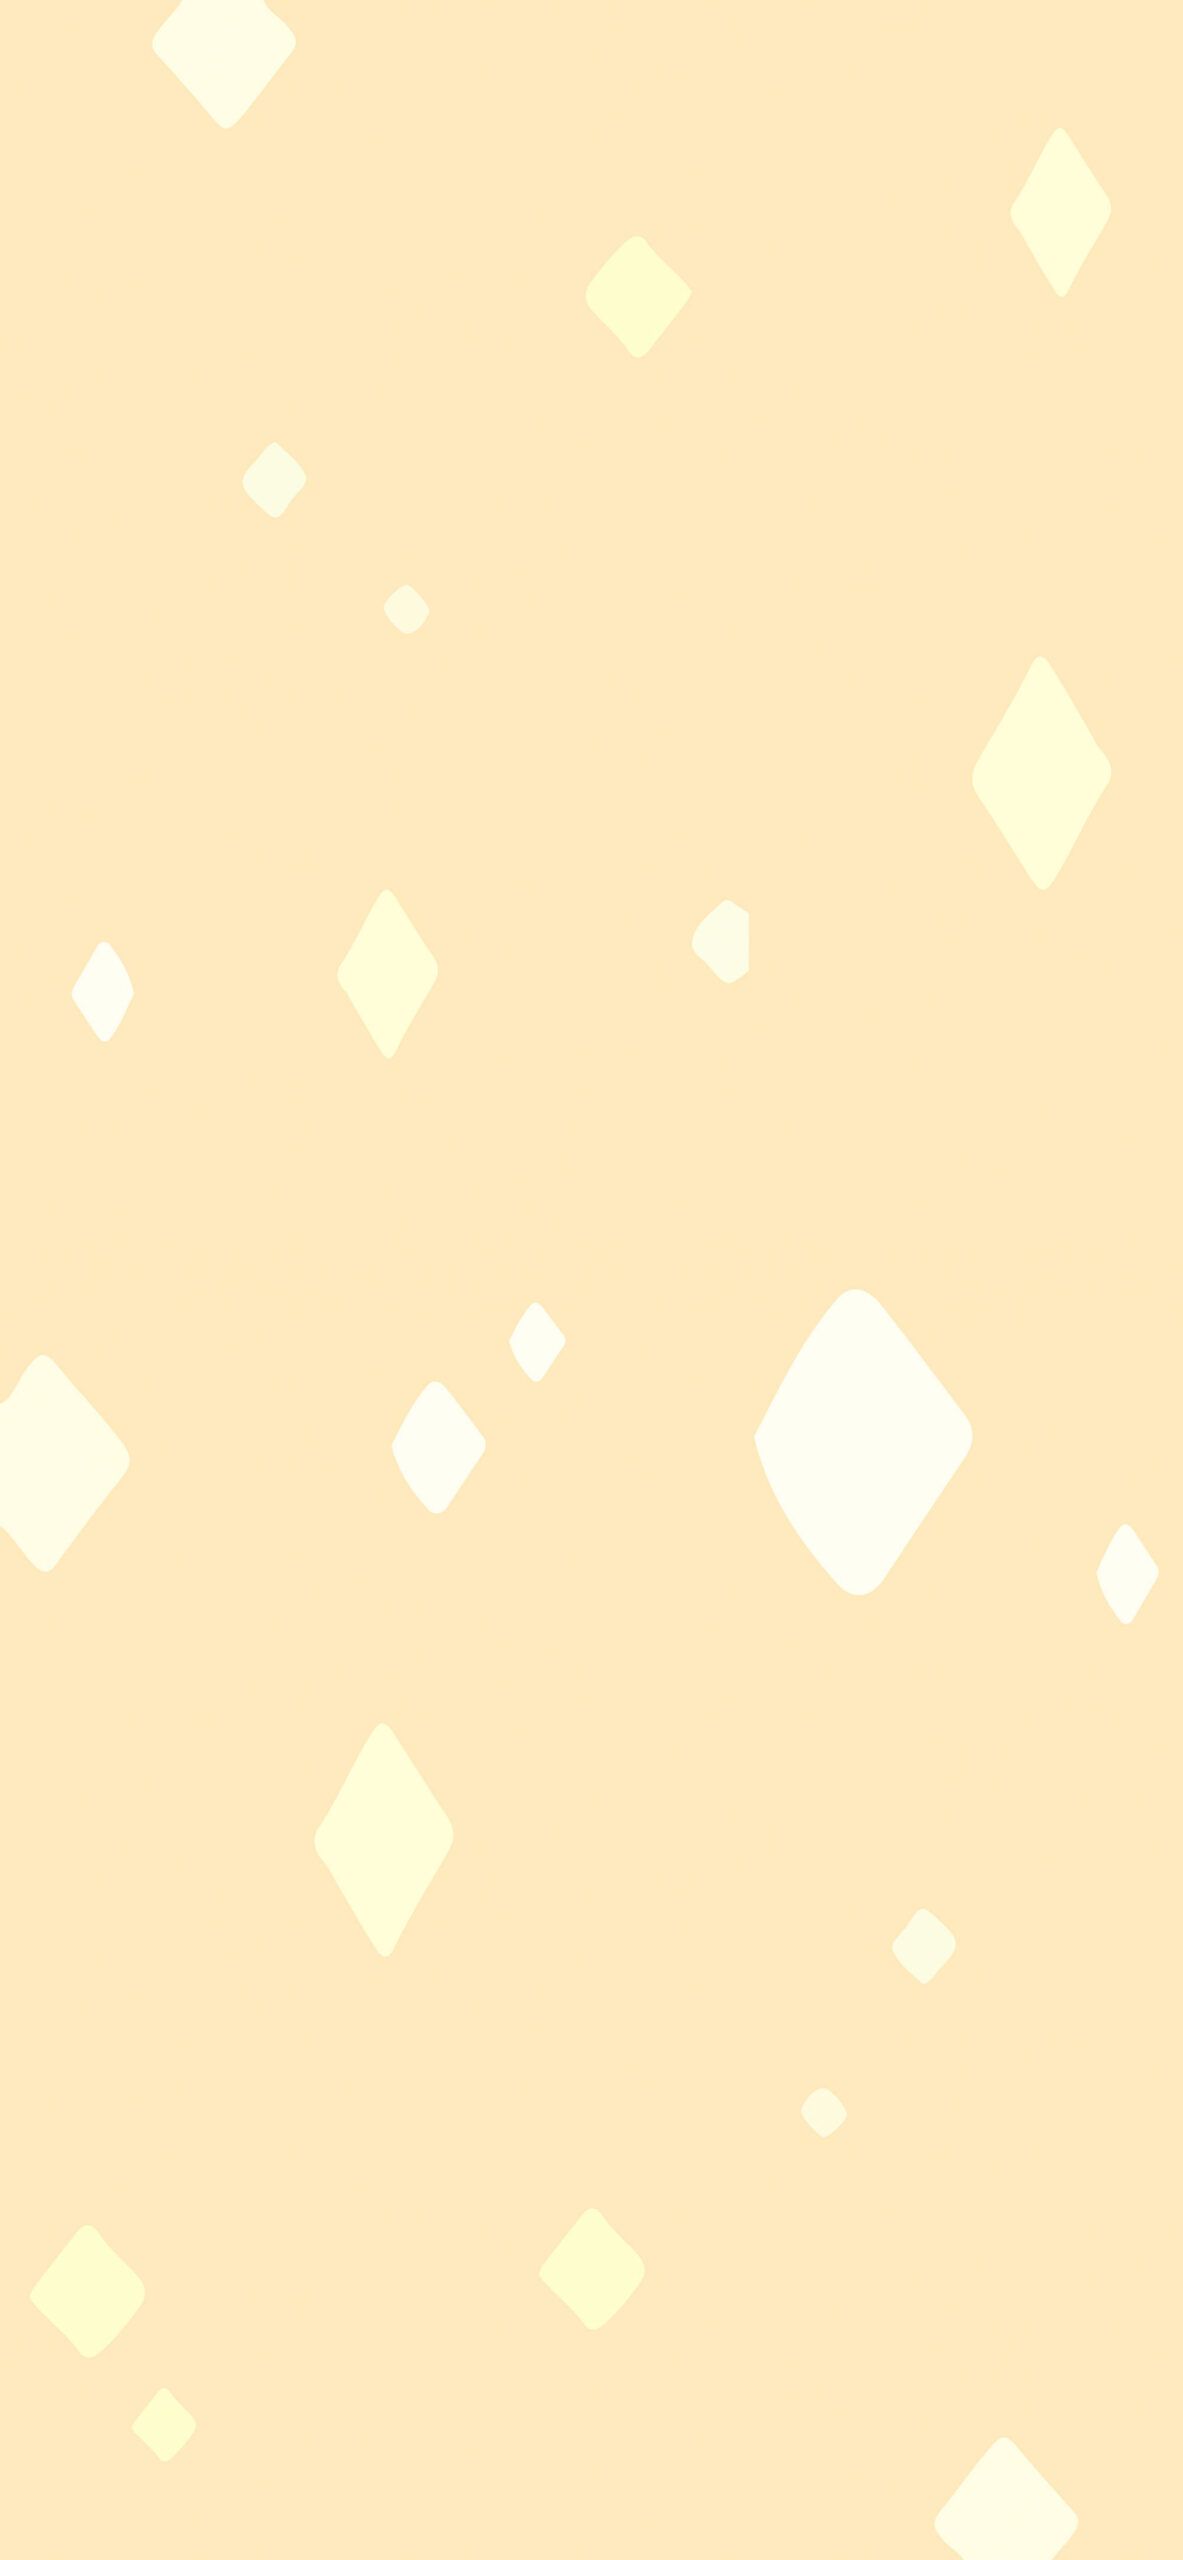 A phone wallpaper with white diamonds on a light yellow background - Yellow, Steven Universe